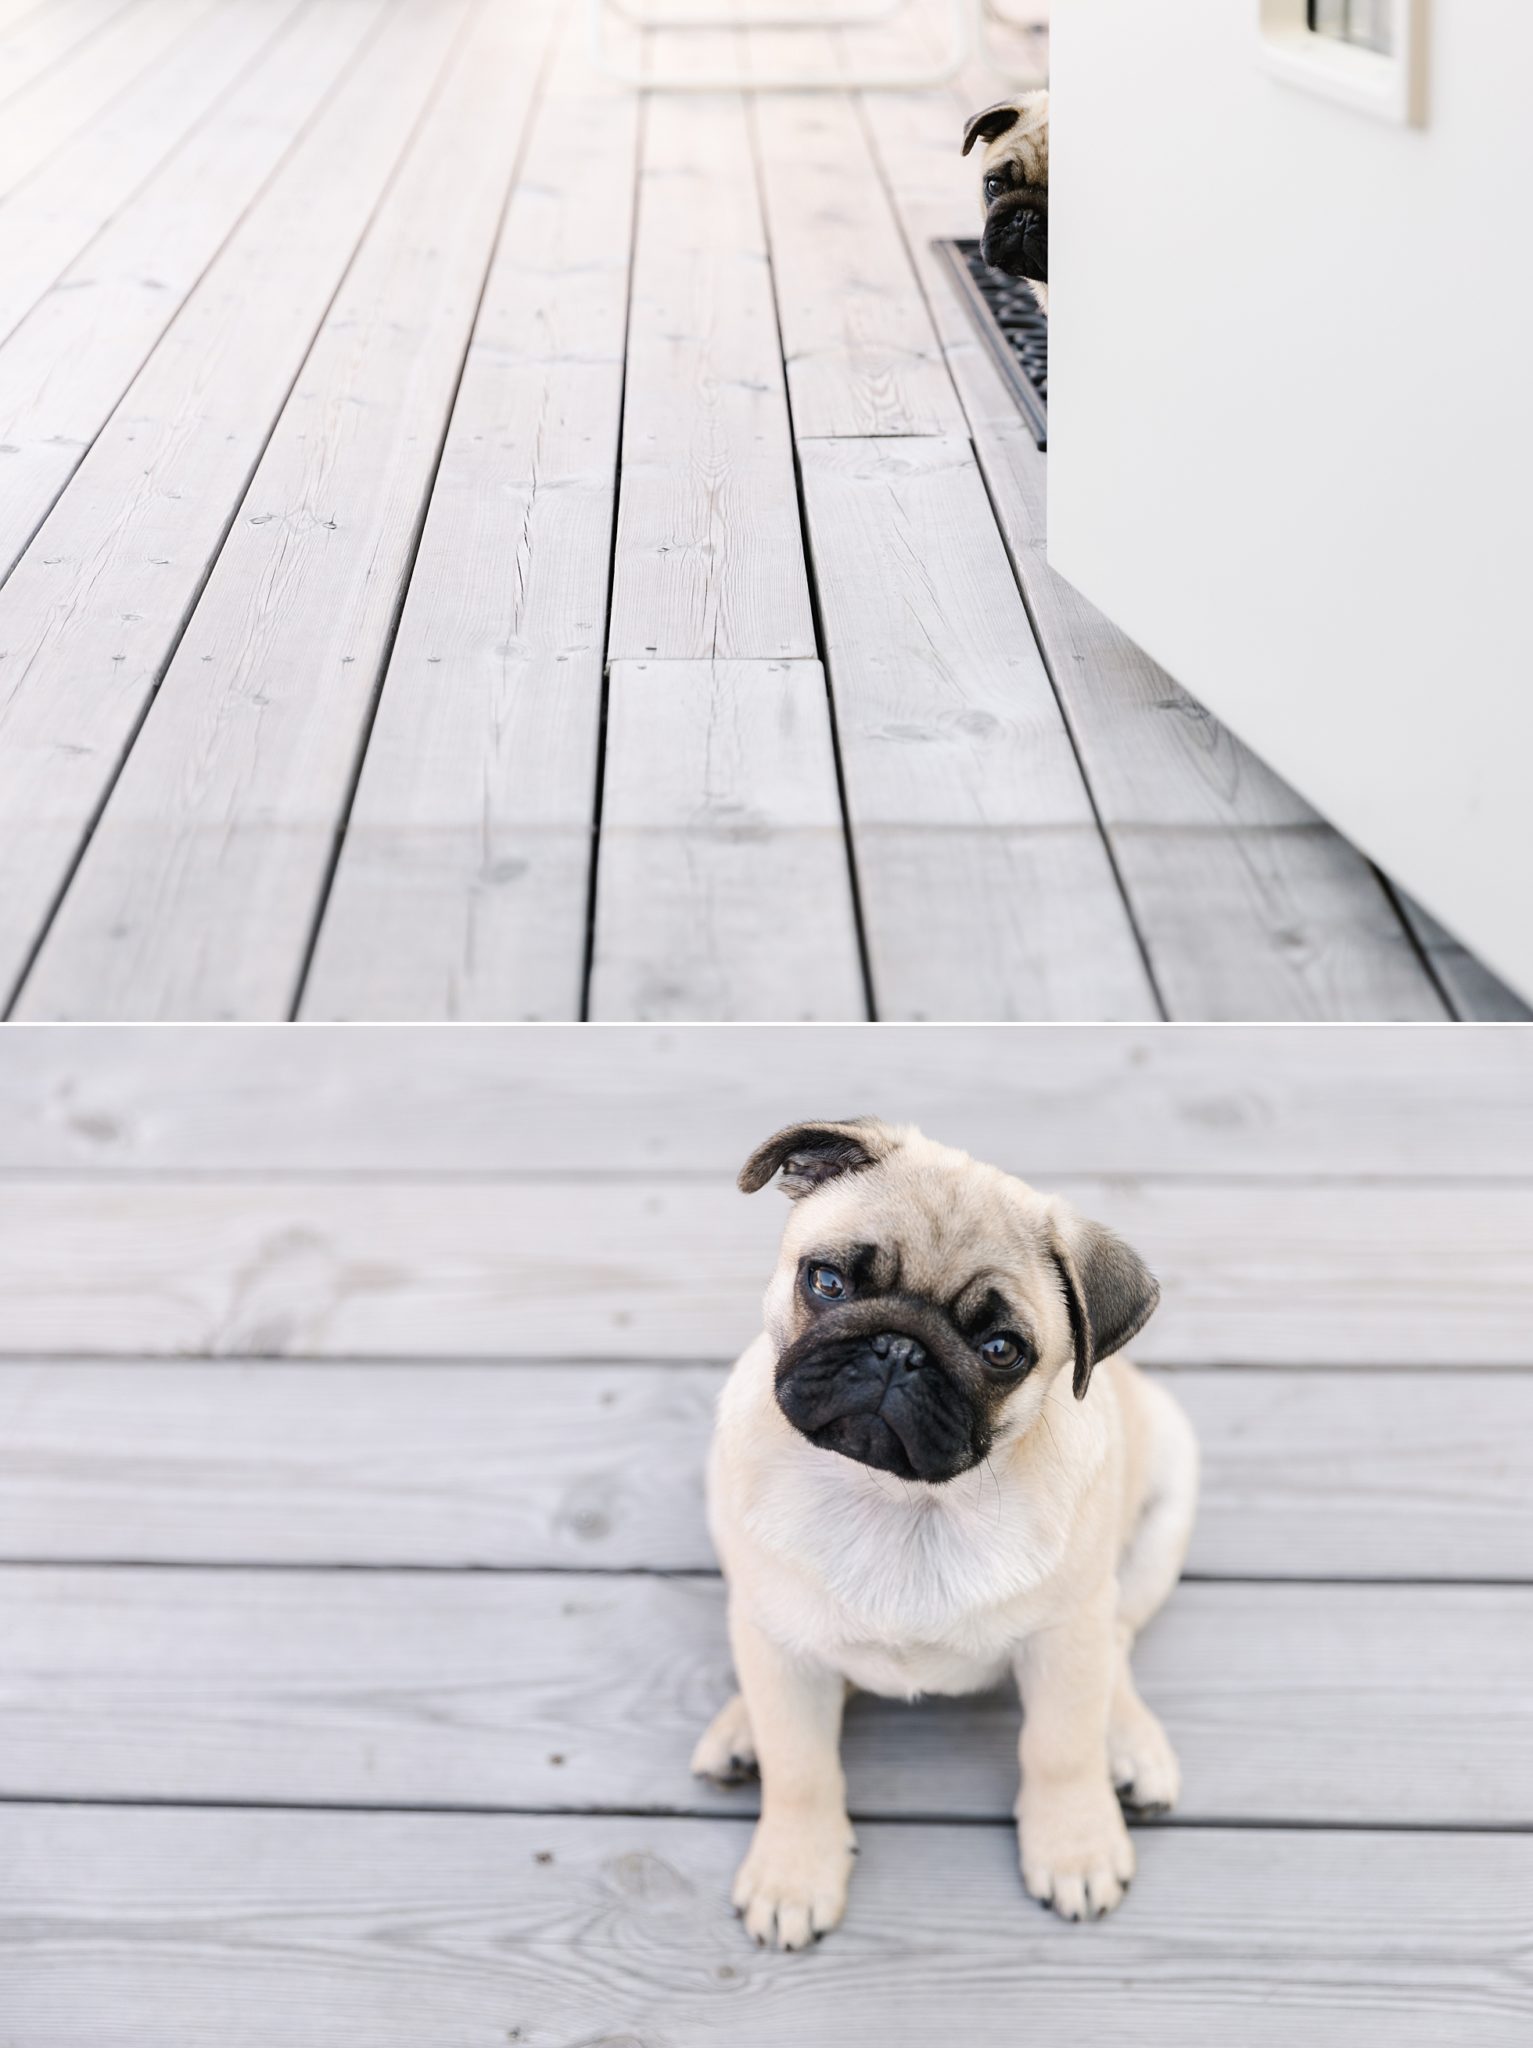 A collage of a cute pug puppy hiding behind a door and sitting